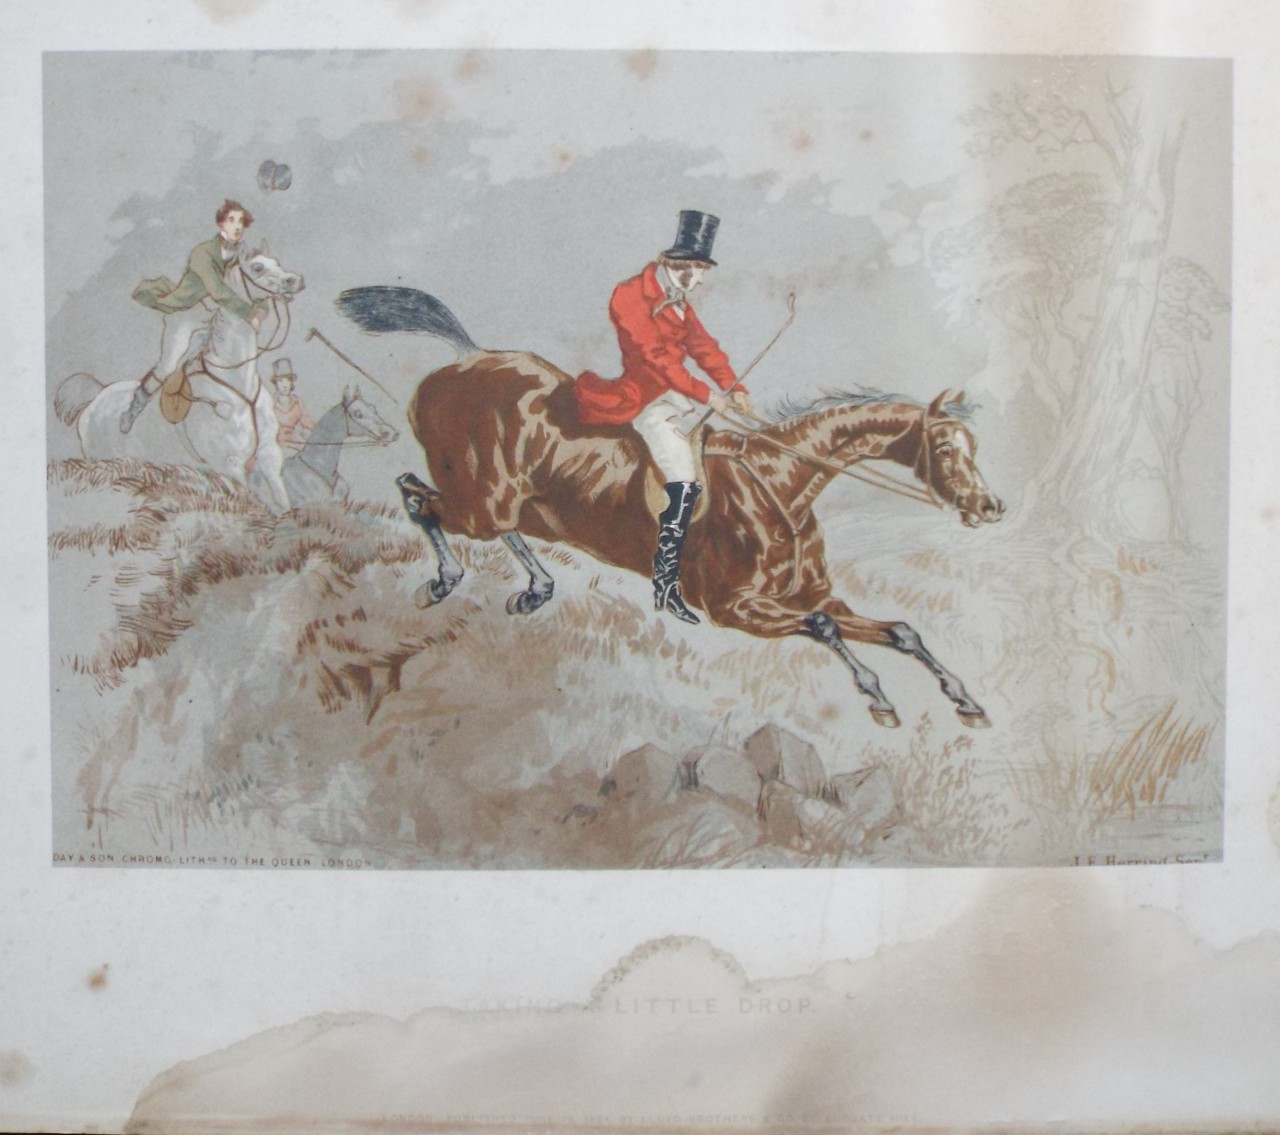 Chromo-lithograph - Herring's Sporting Sketches. Taking a Little Drop.